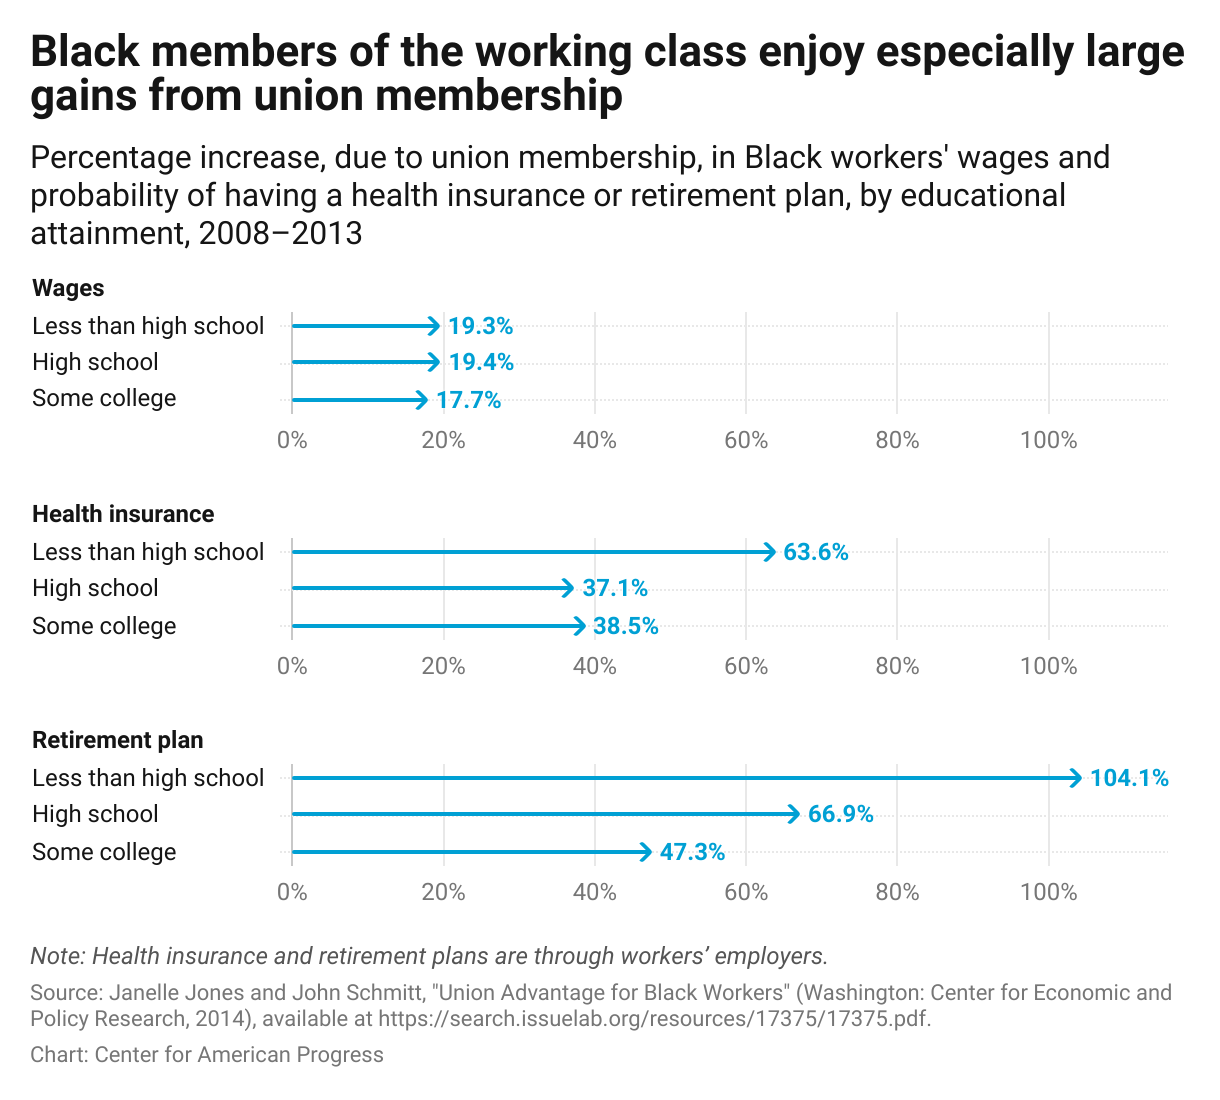 Chart showing that Black working-class union members with high school diplomaas earn a 19.4 percent increase in wages and have a 37.1 percent increase in the likelihood of having health insurance and a retirement plan through their employers.